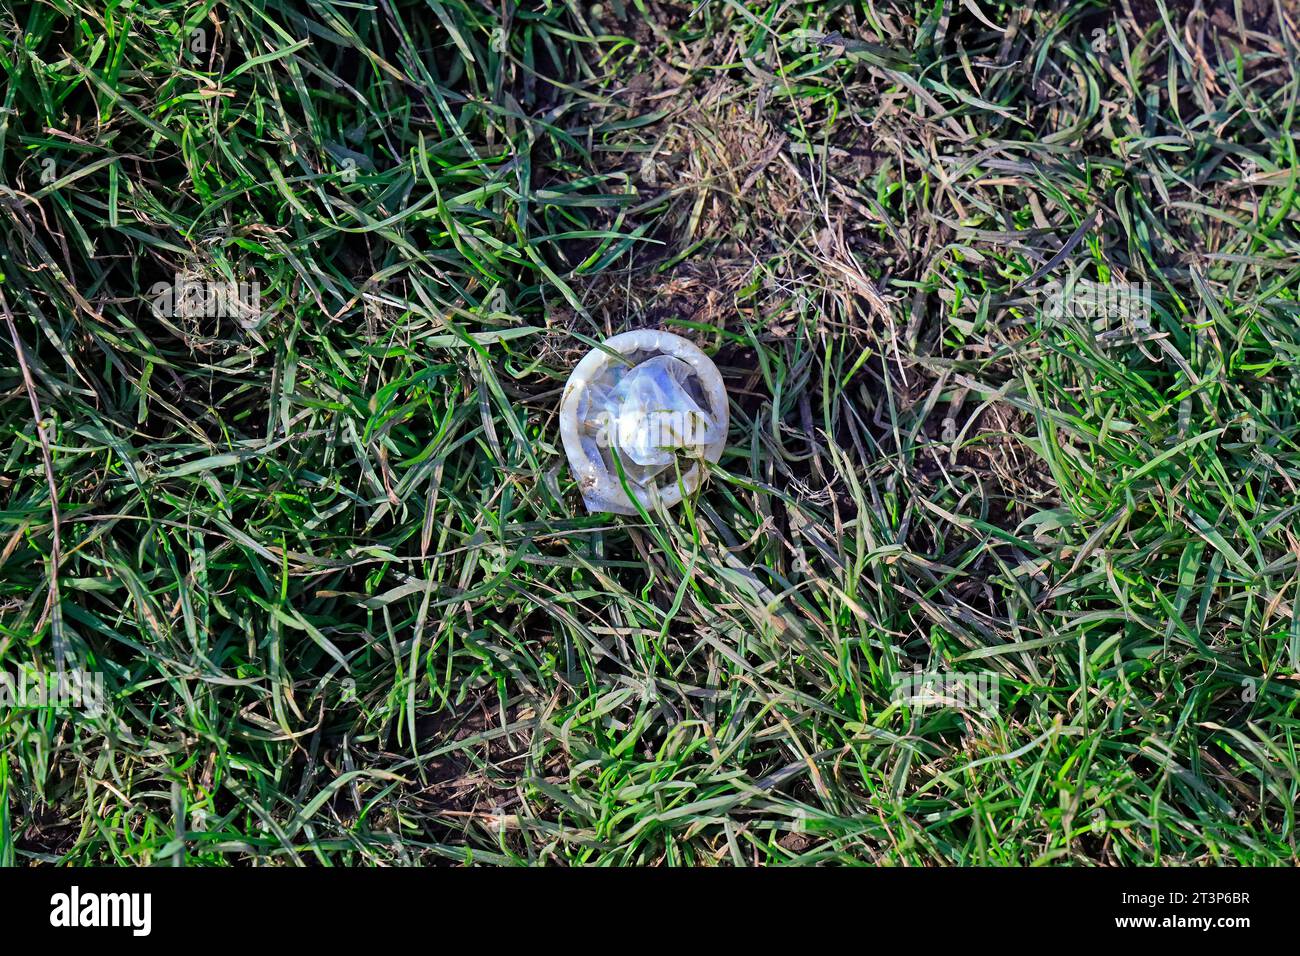 Unwrapped / perhaps used condom on grass. Cardiff. Taken Autumn 2023. October Stock Photo